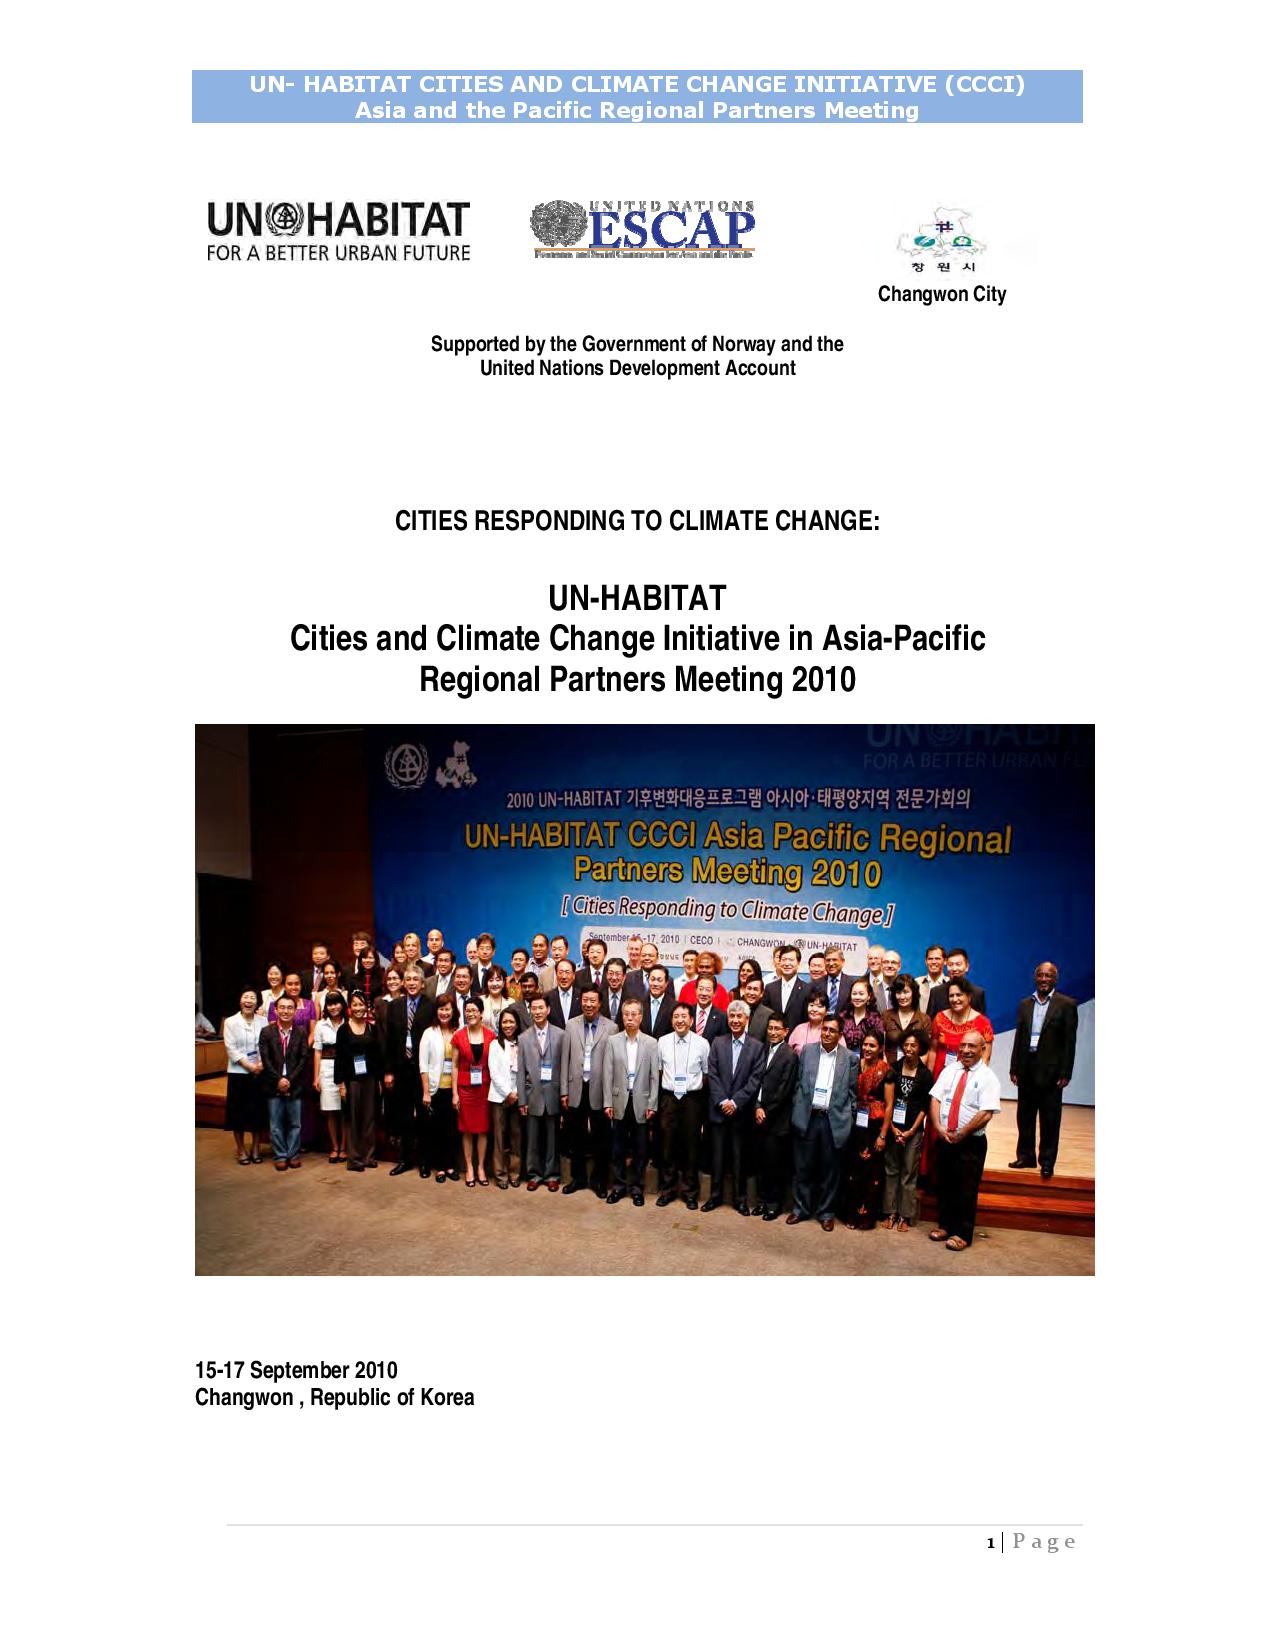 Asia-Pacific Regional Partners Meeting (Changwon, Republic of Korea; 15-17 September 2010) – CCCI